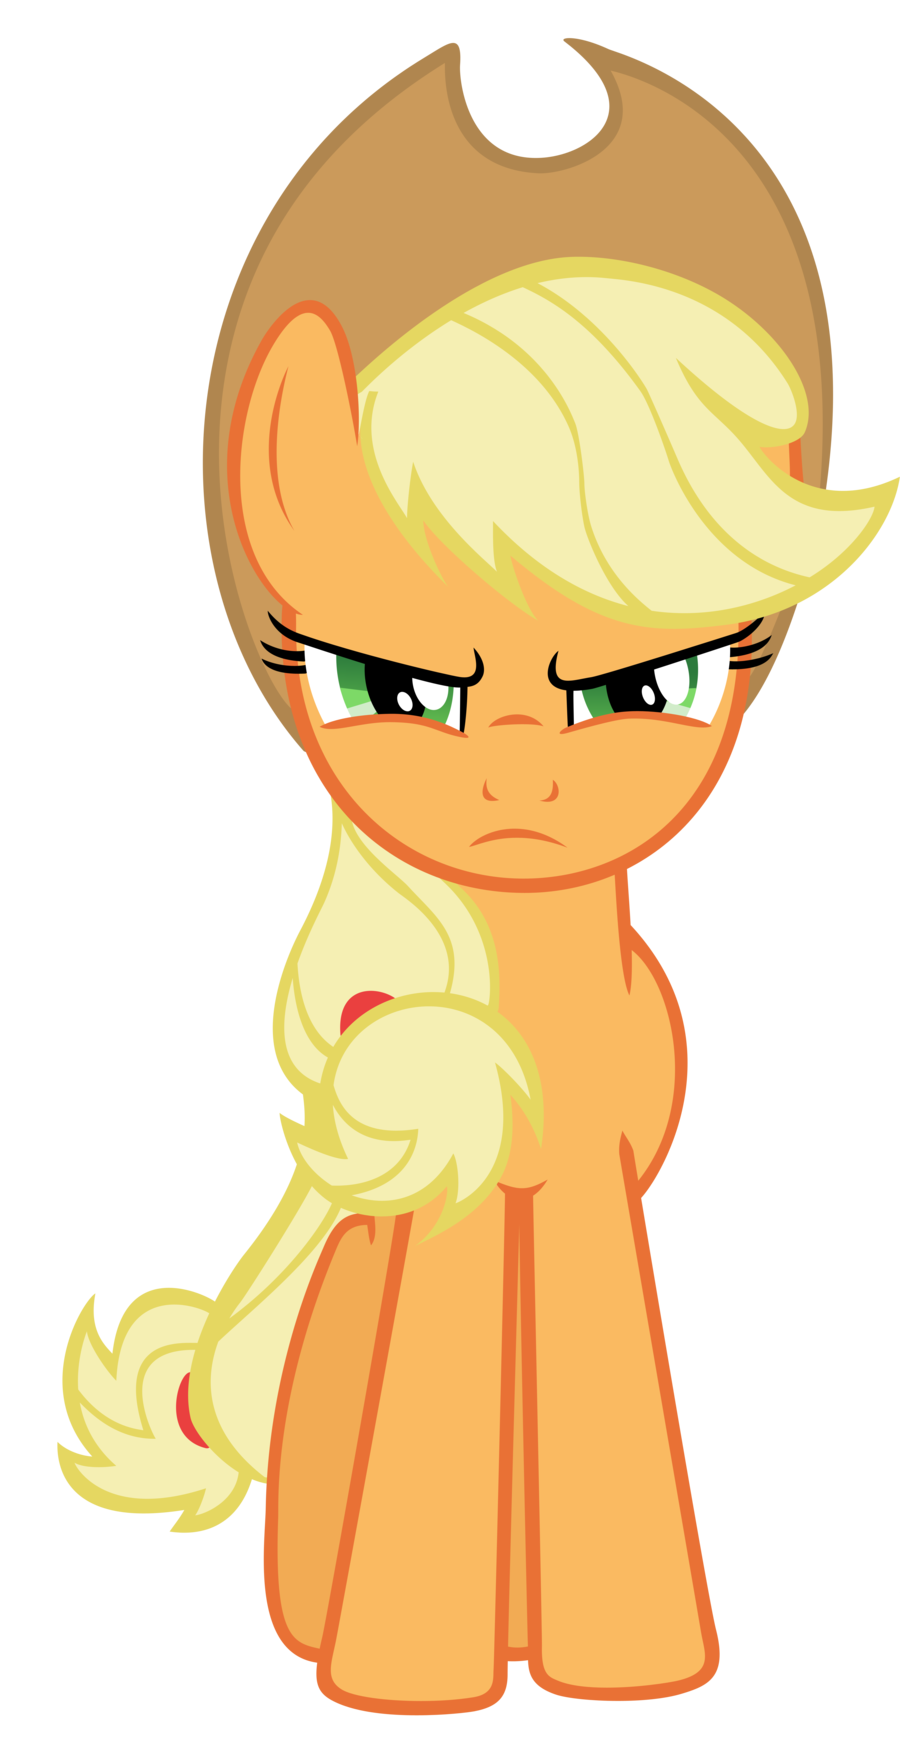 applejack_intro_by_kired25-d53rg1o.png